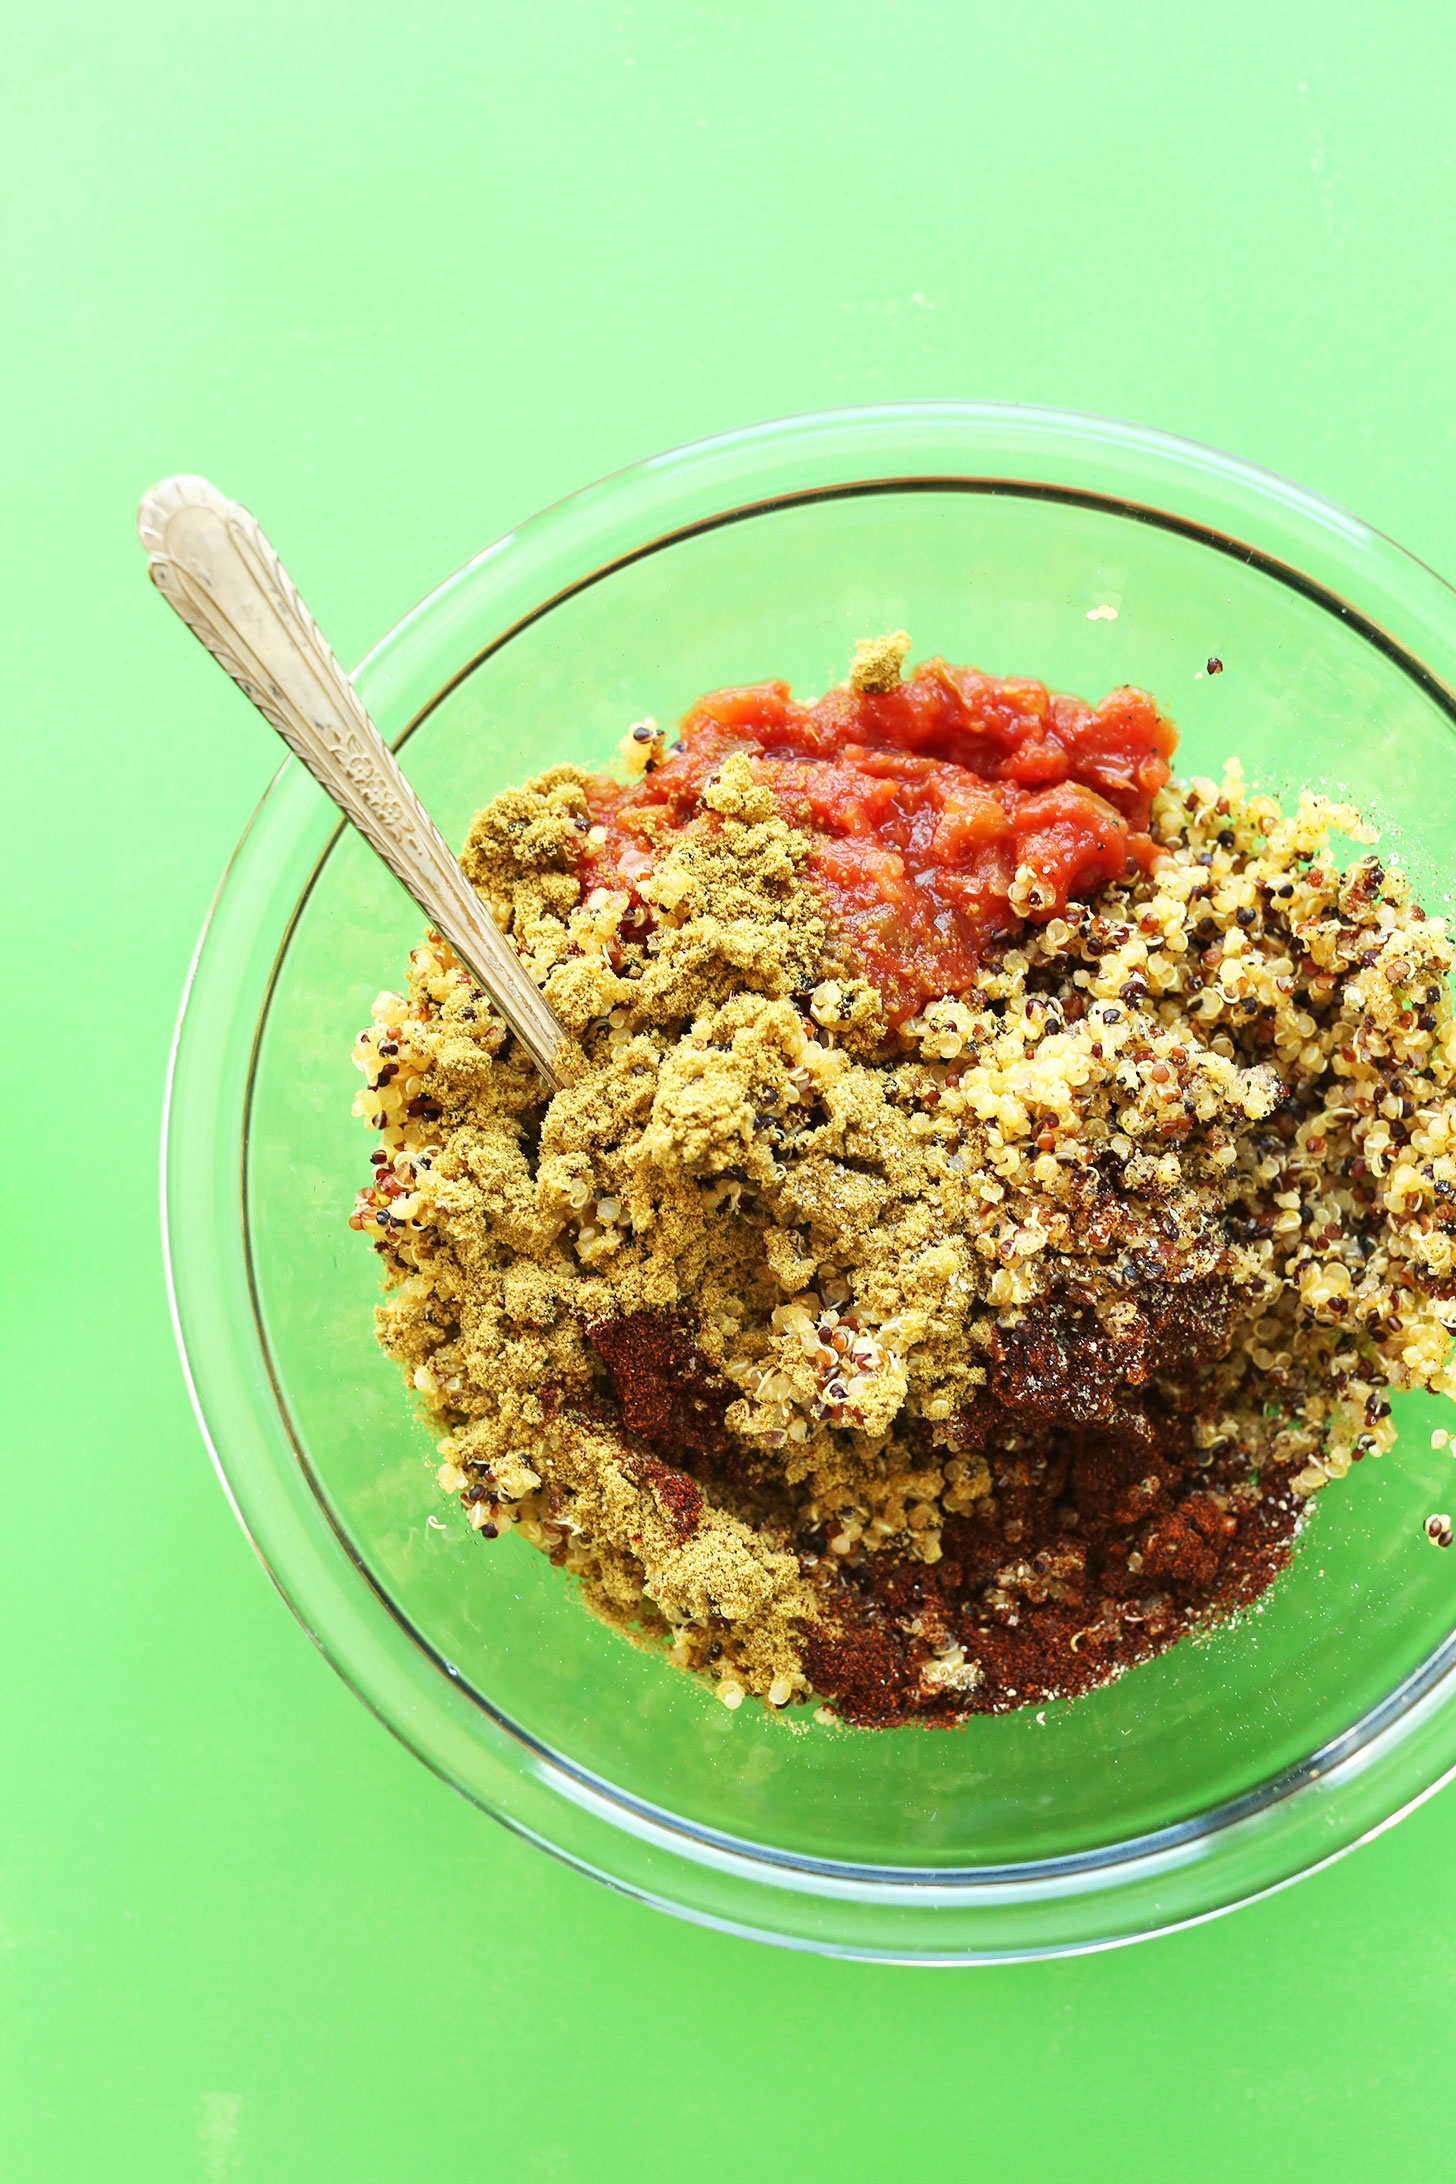 Mixing together quinoa and spices to make healthy, easy Quinoa Taco Meat